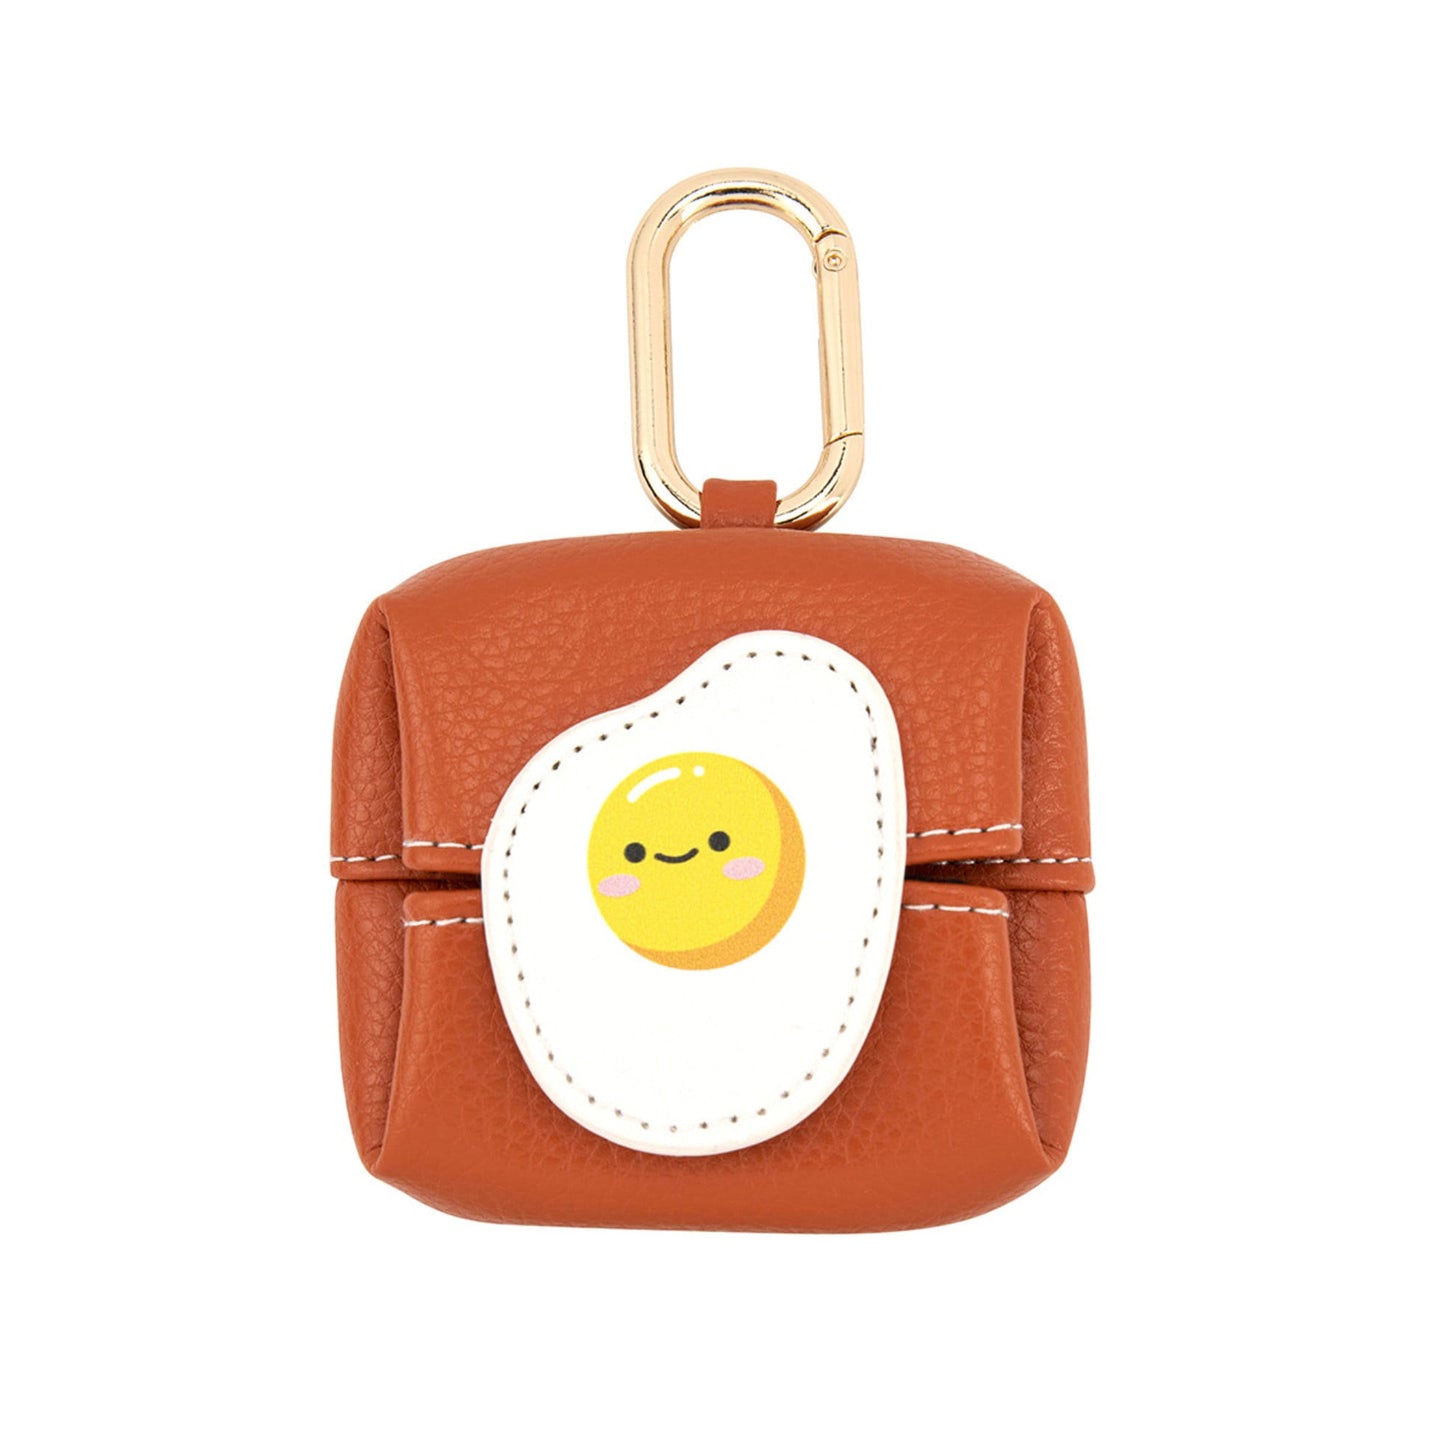 Cute Food Themed AirTag, Small Accessory Bag with Clasp (Egg, Bread, Lemon, Carrot, Strawberry, Pineapple, Avocado)